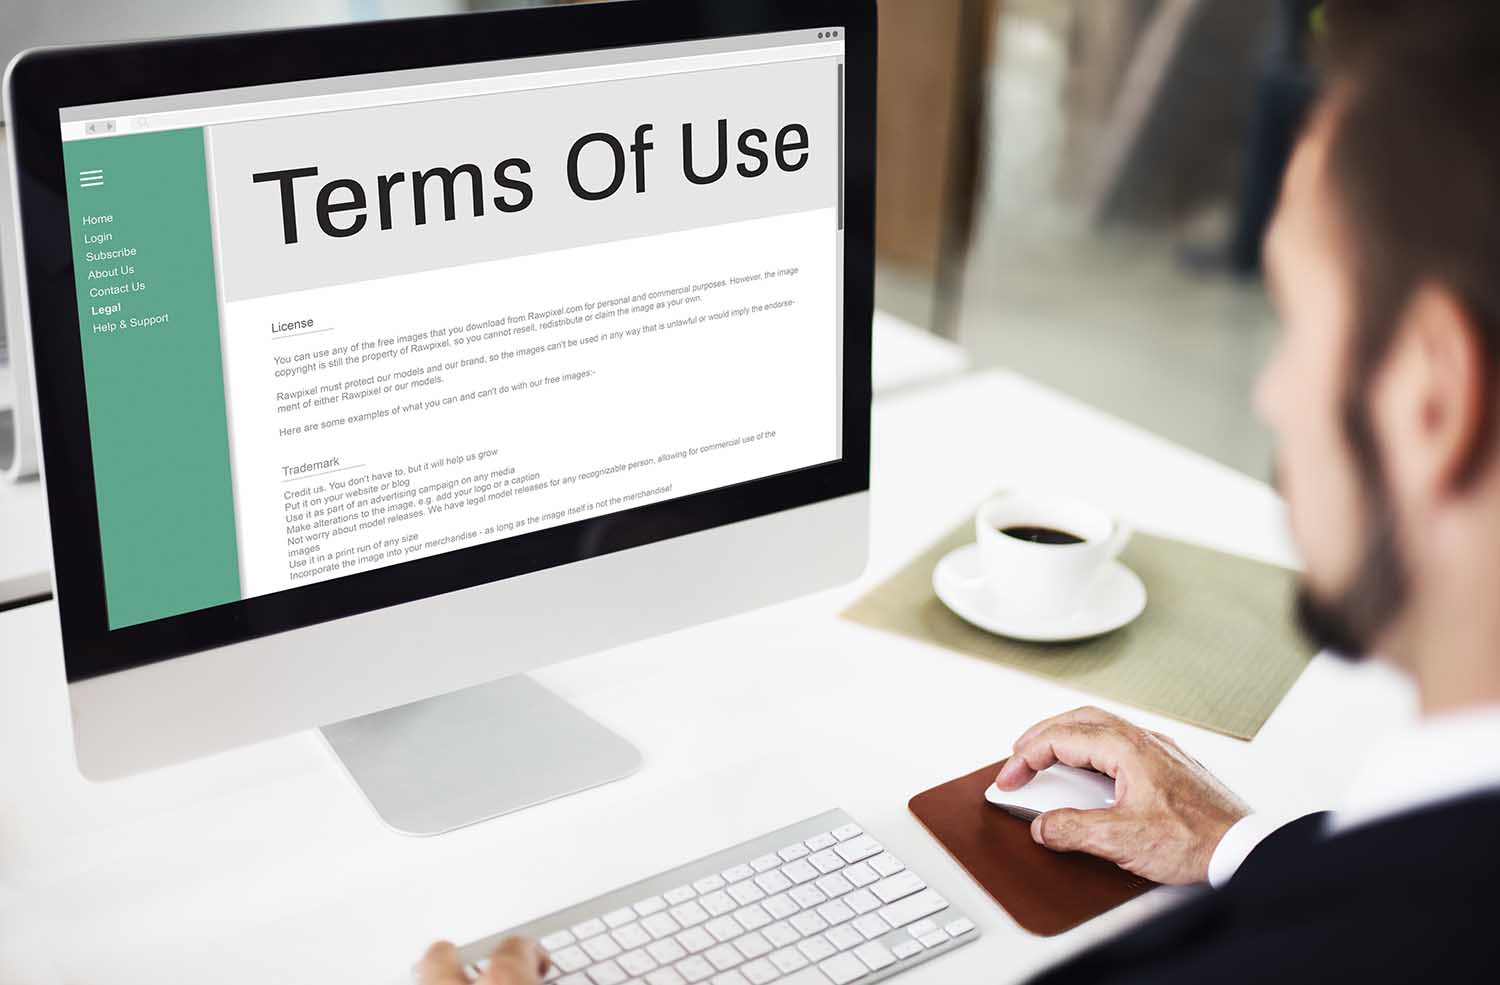 Usage Rights and Licensing Terms